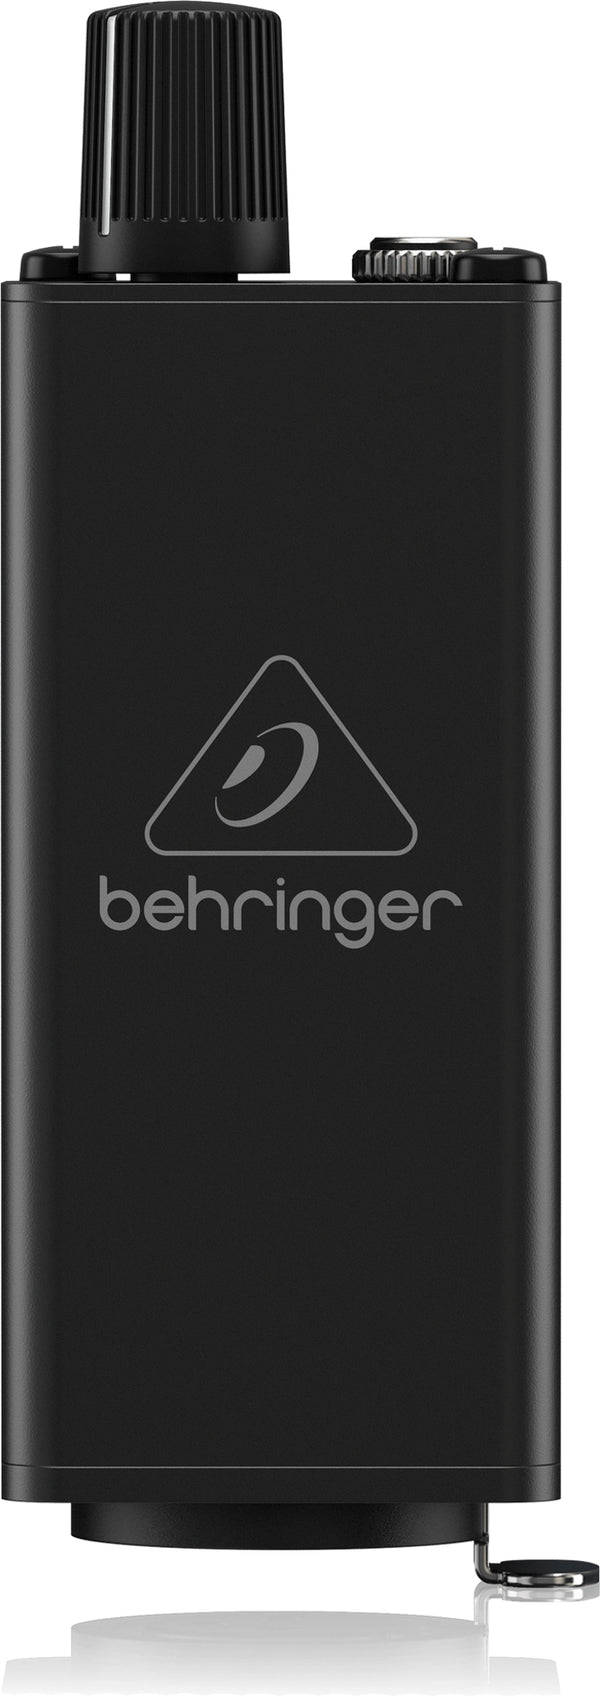 Behringer PM1 Personal Monitor